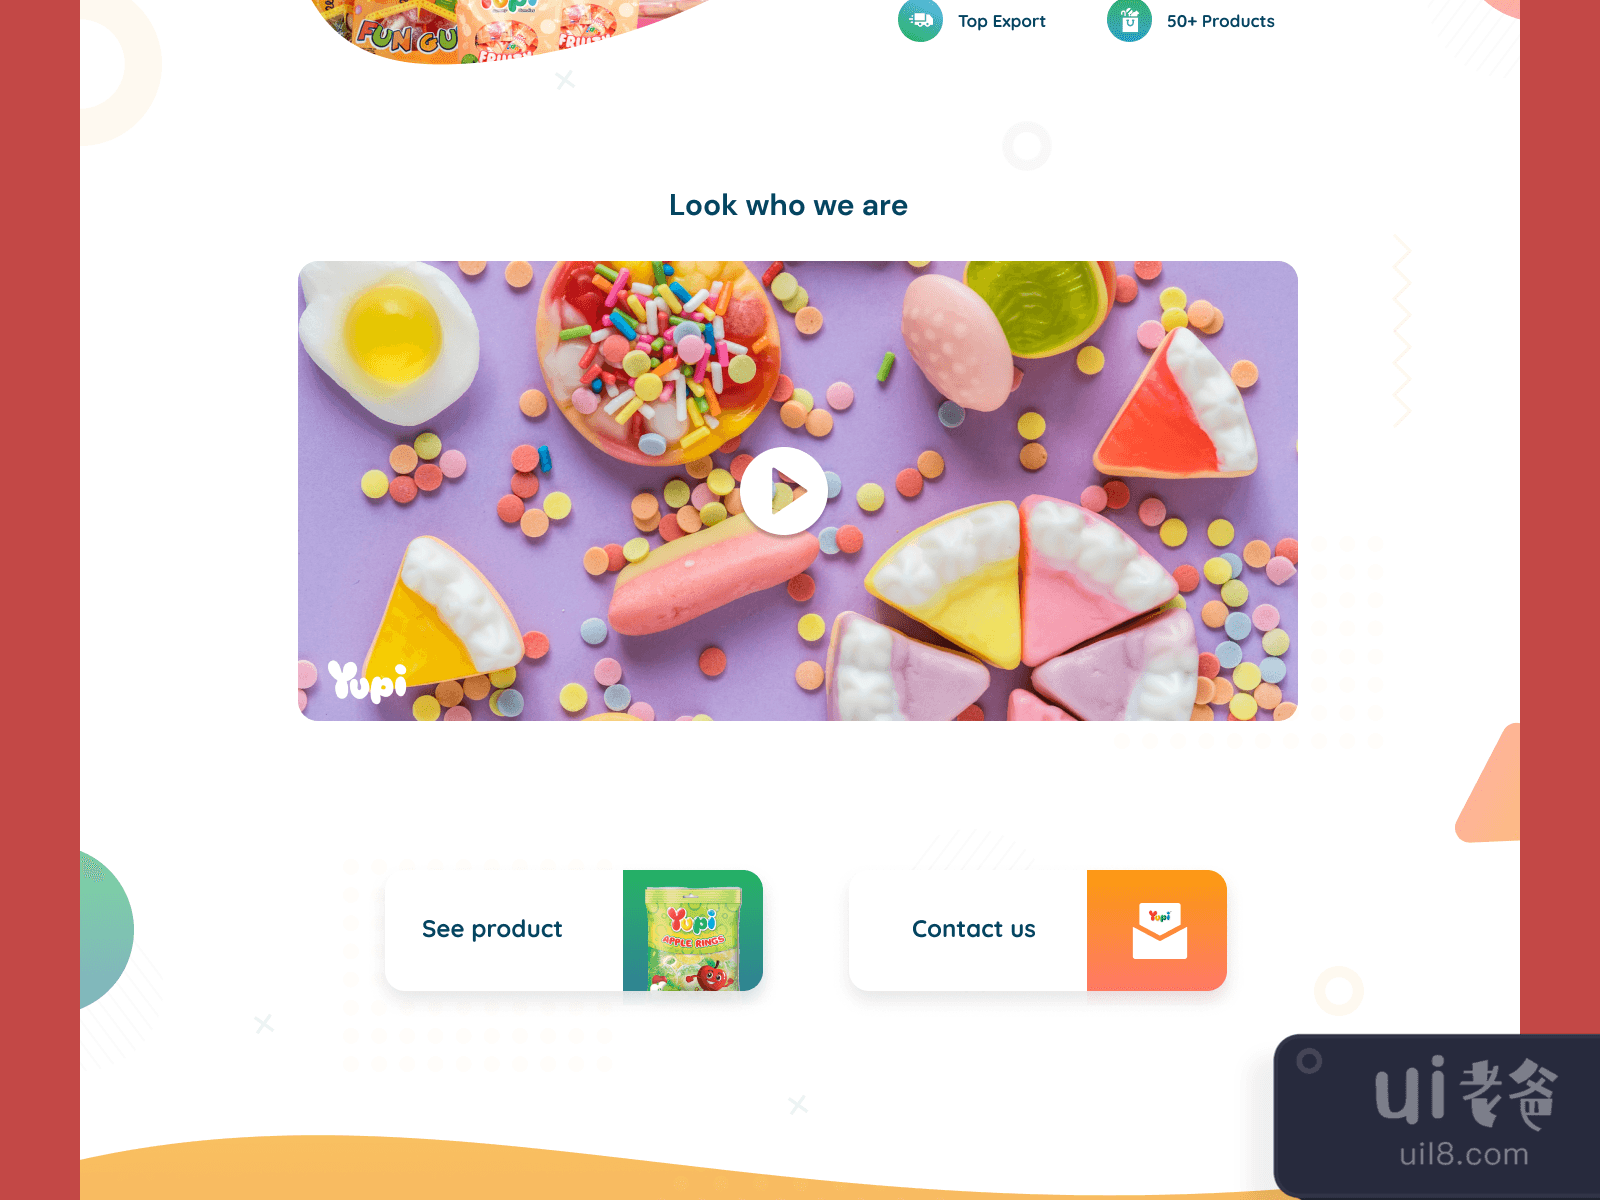 Gummy Candies Home for Figma and Adobe XD No 3